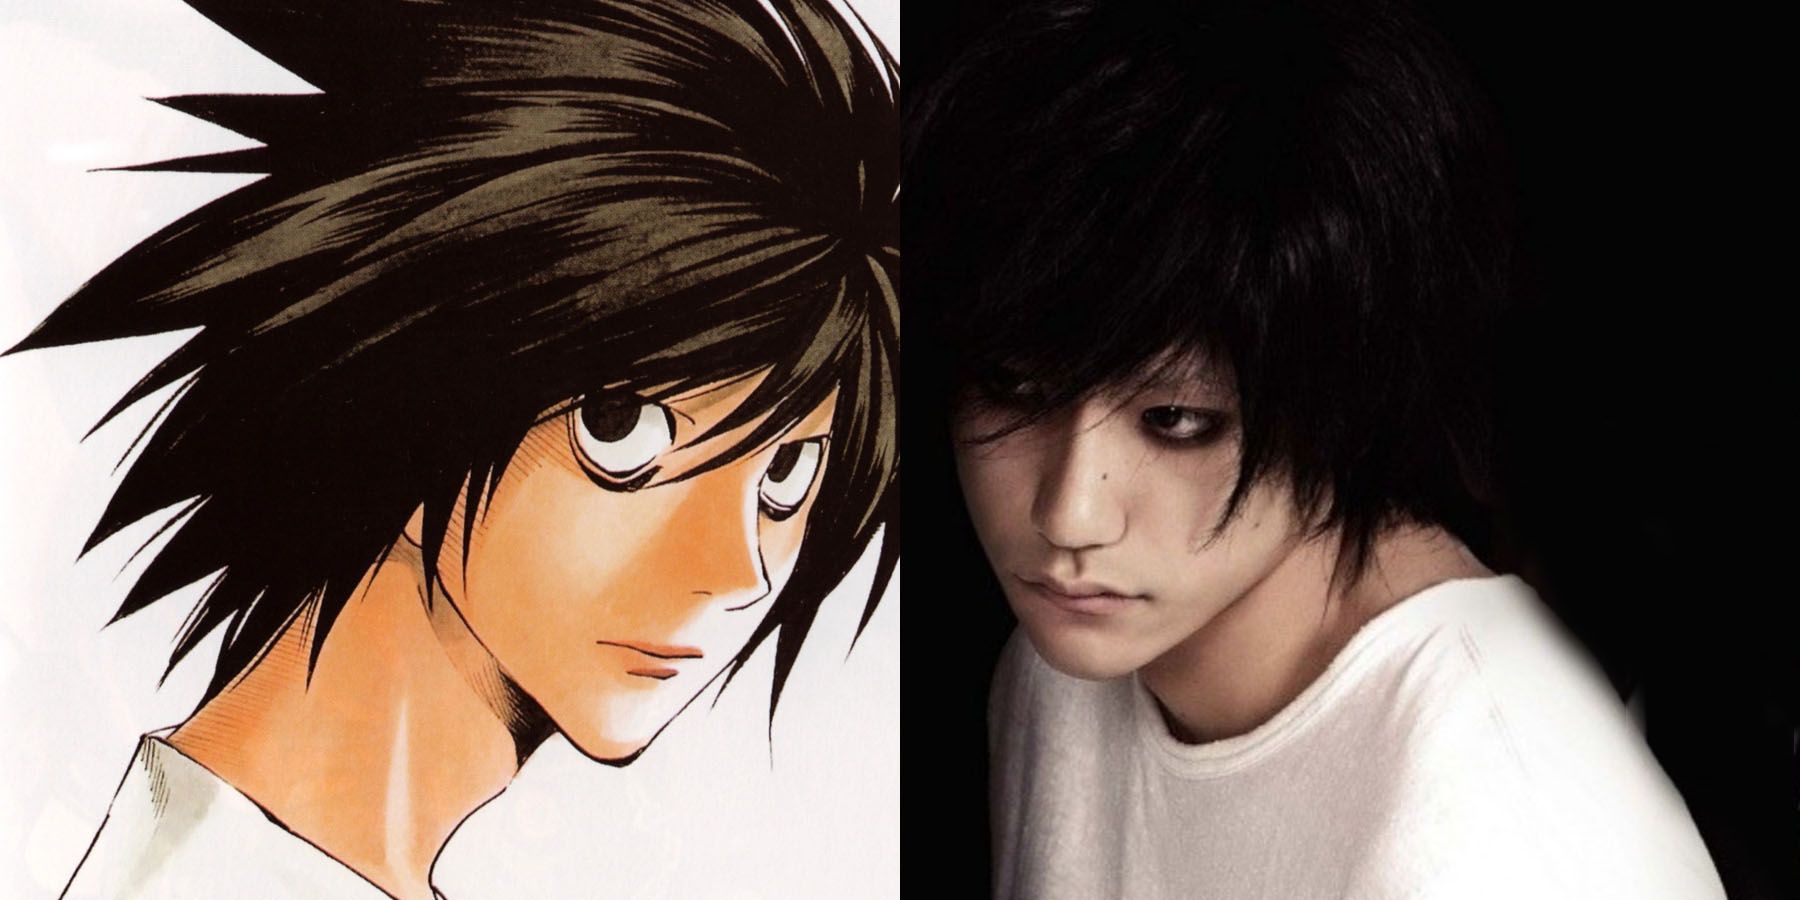 barbara mace recommends Pics Of L From Death Note